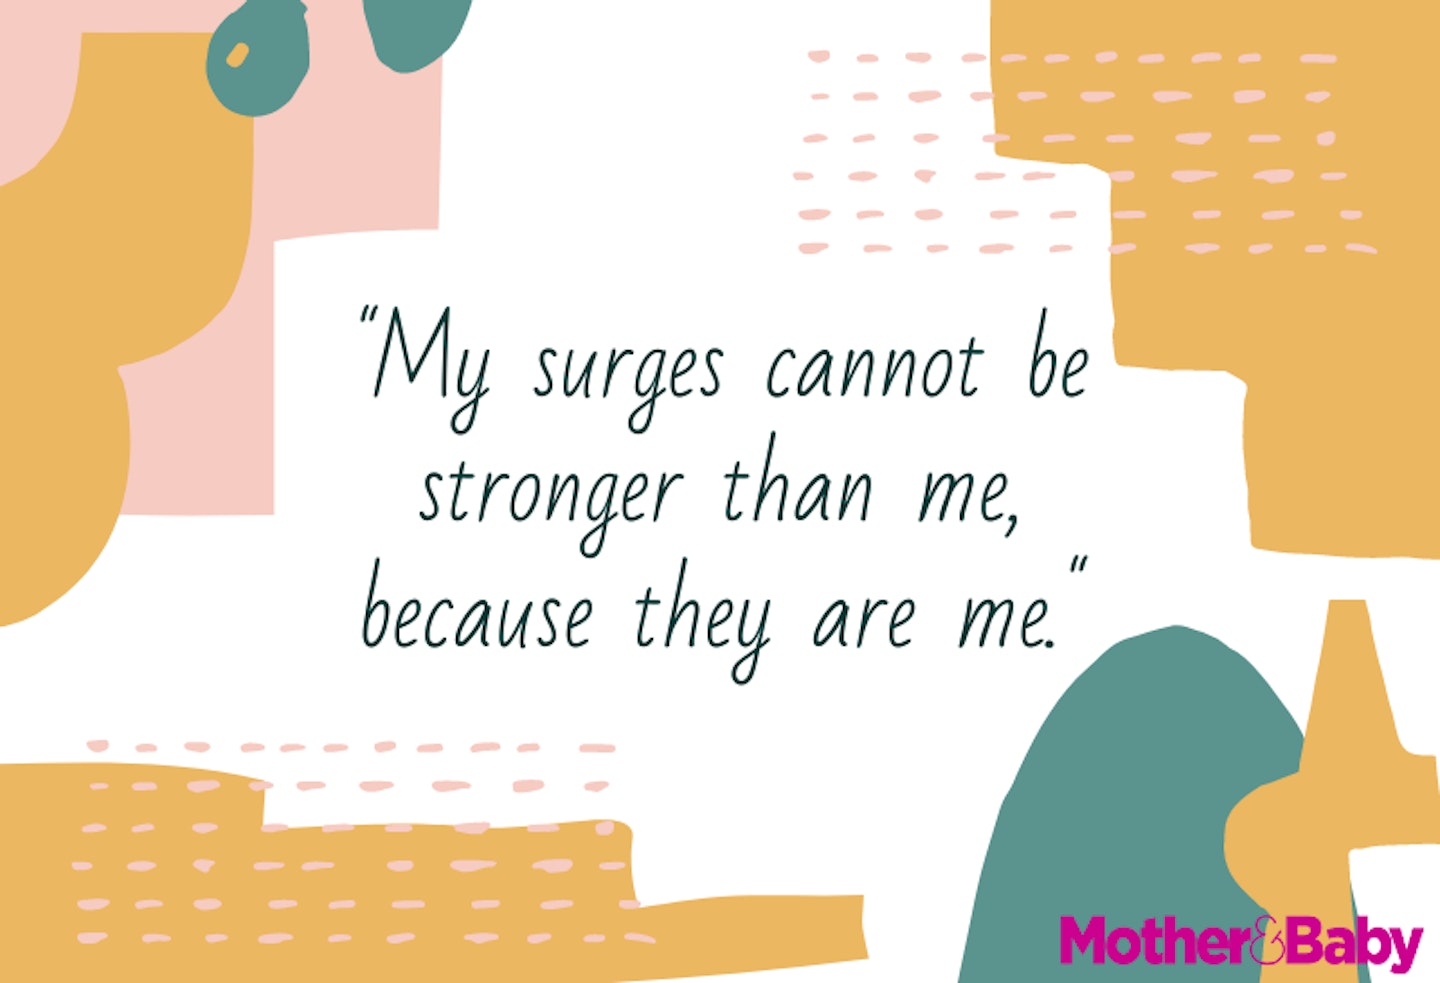 My surges cannot be stronger than me, because they are me